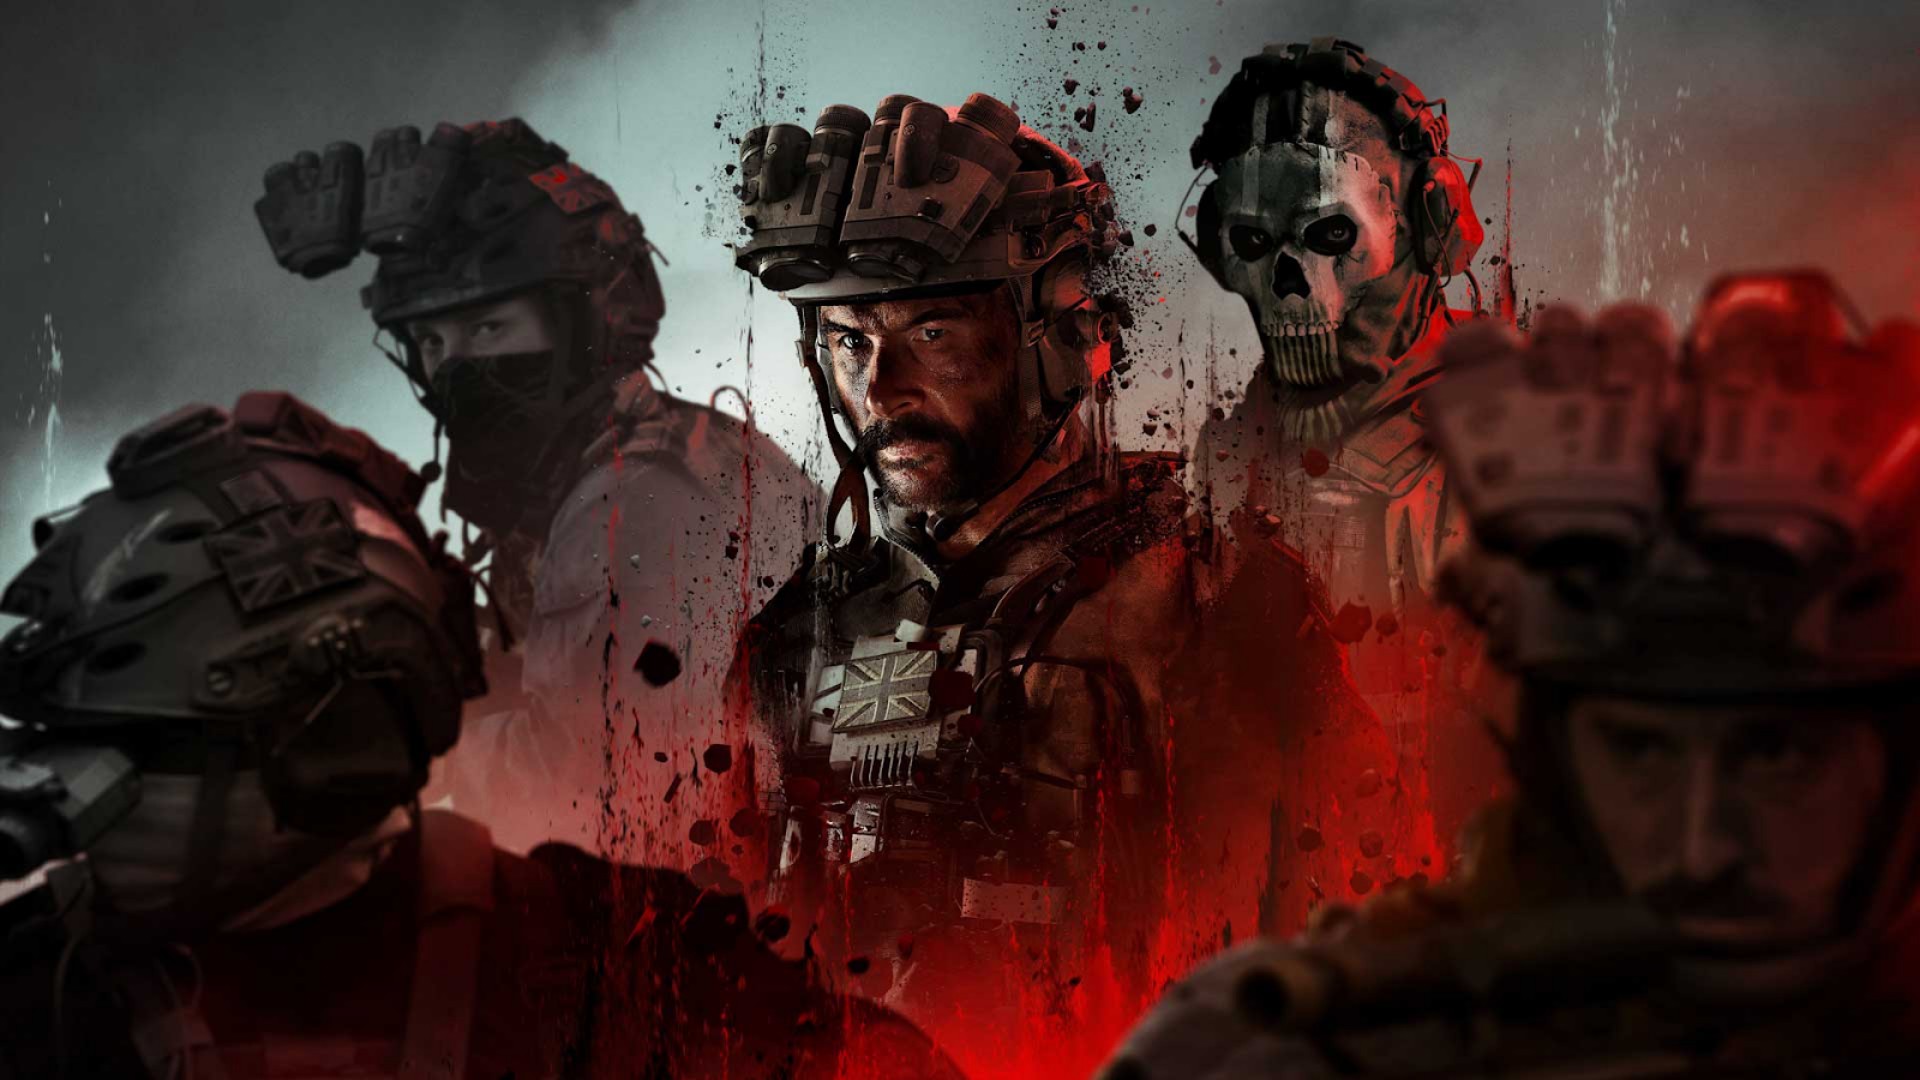 Modern Warfare 2 is more about its characters than shocking the audience